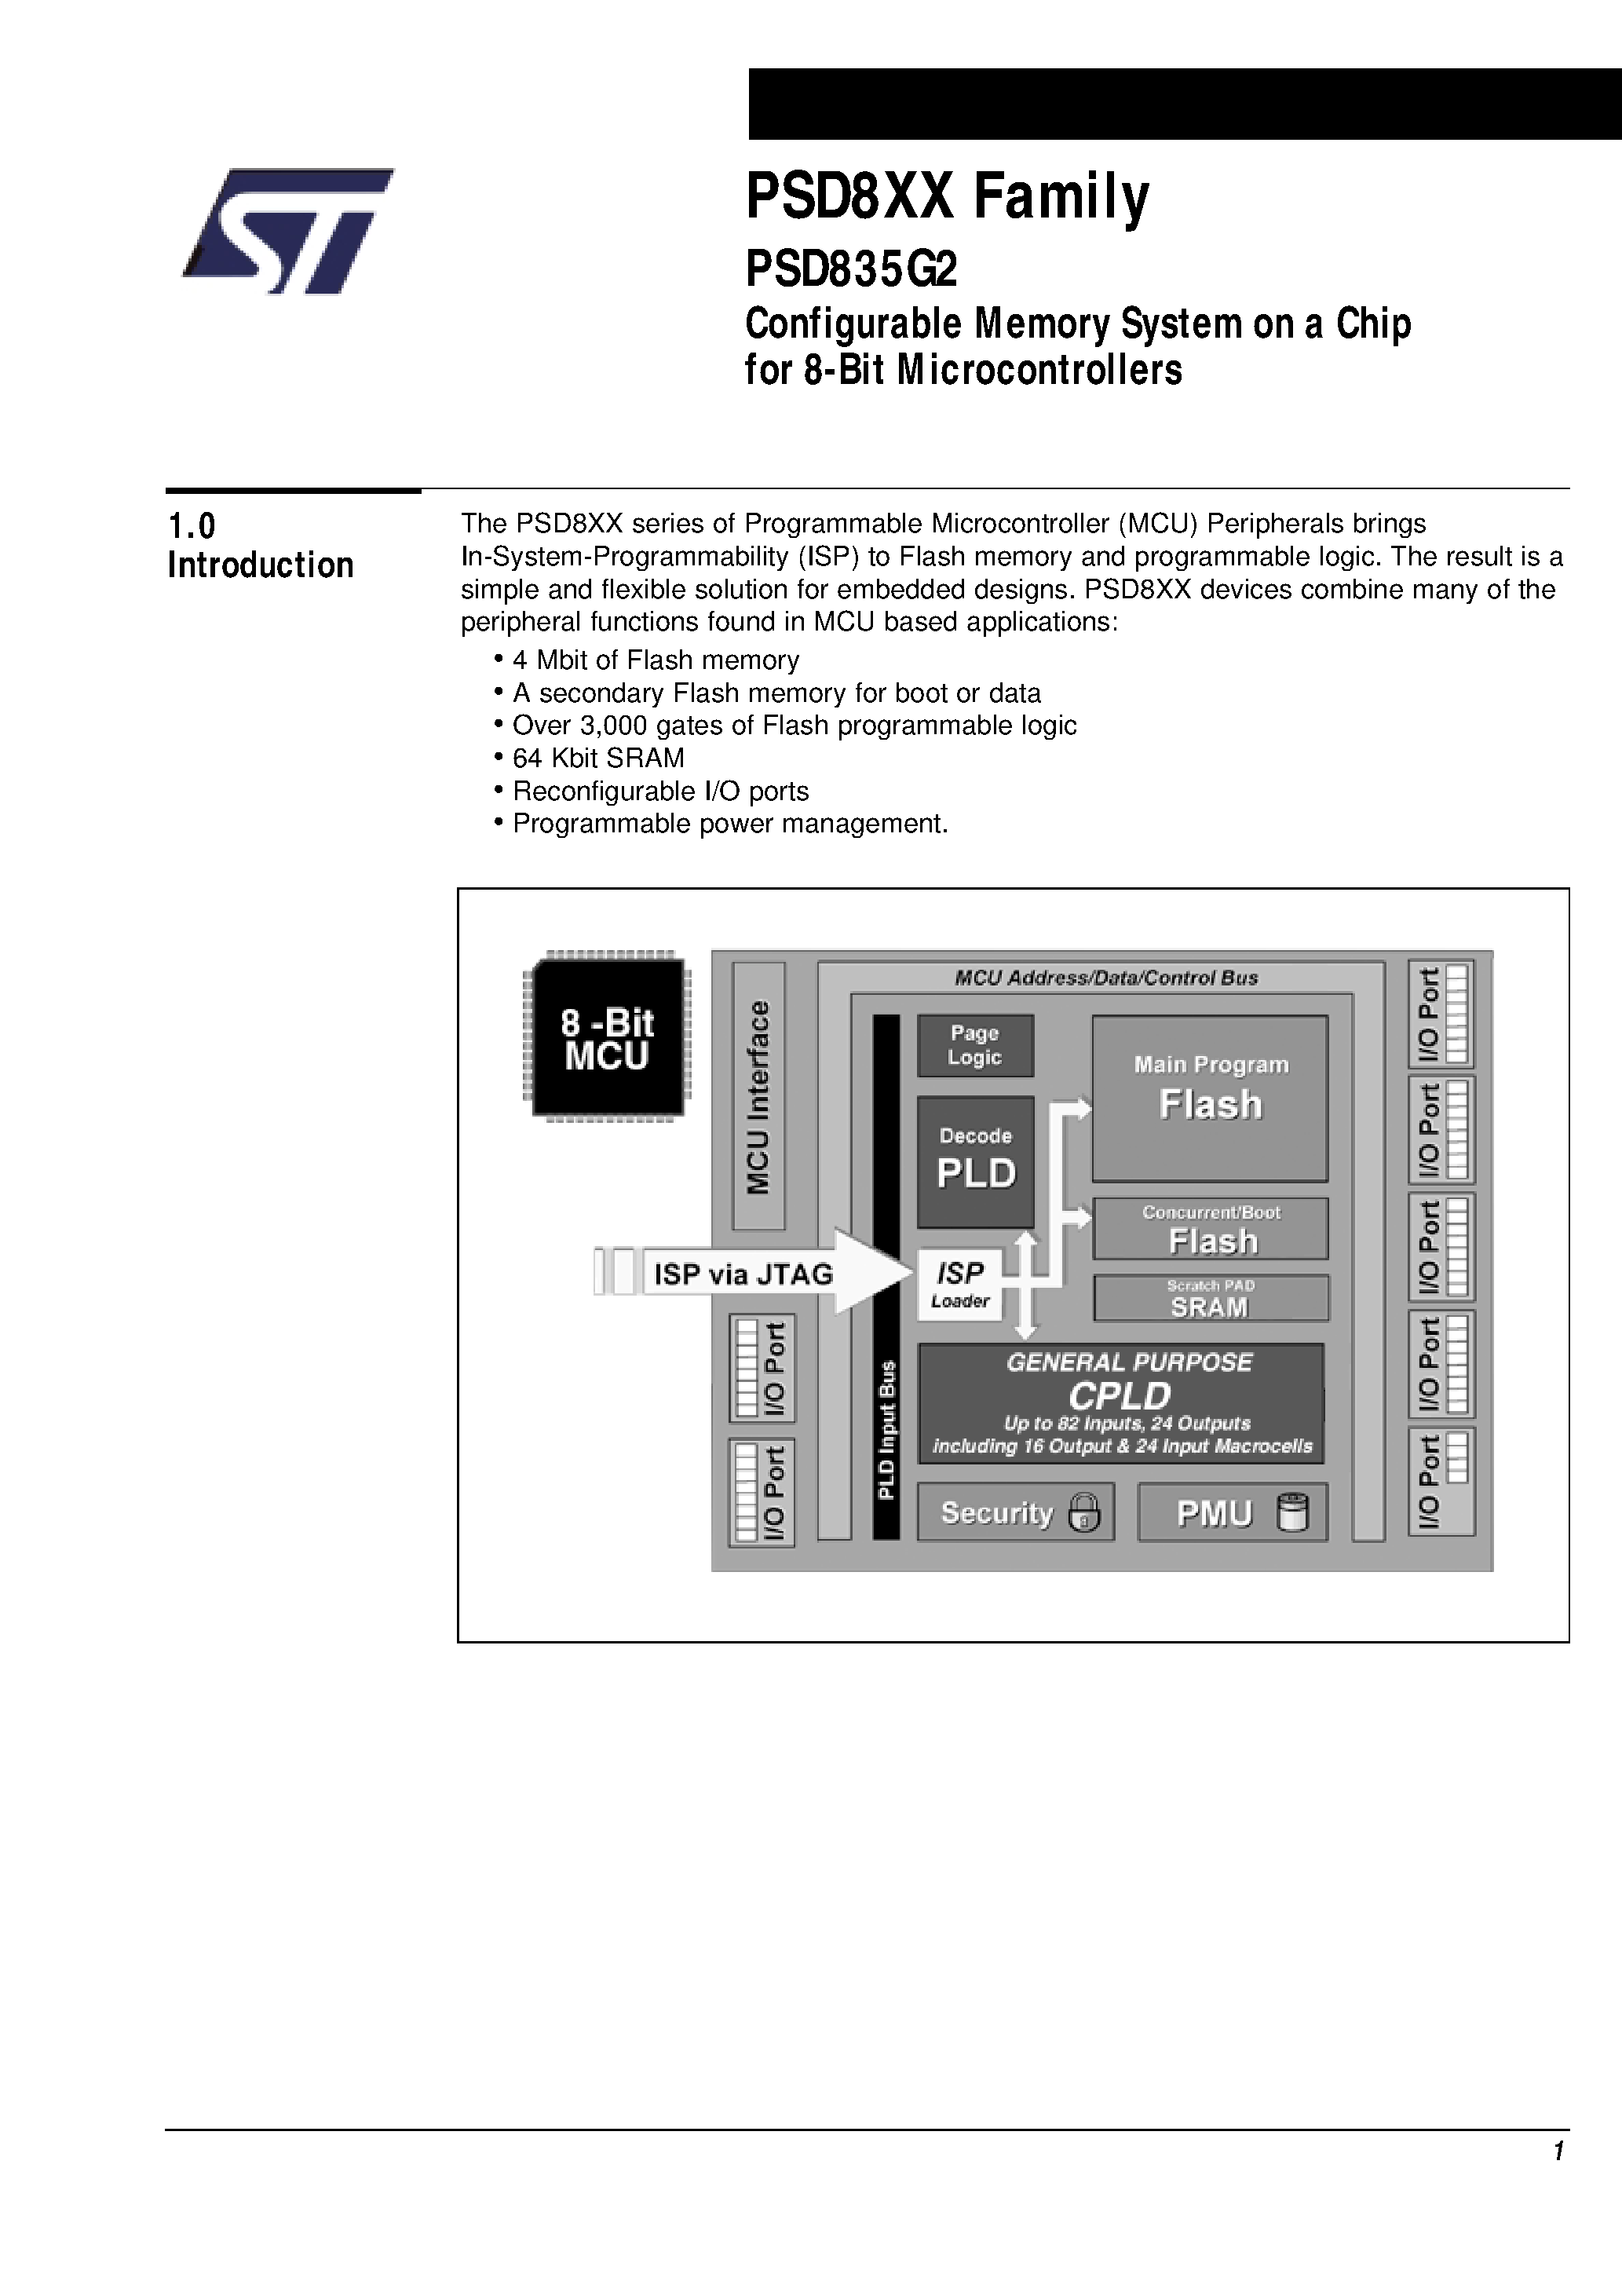 Datasheet PSD835F2-A-70B81I - Configurable Memory System on a Chip for 8-Bit Microcontrollers page 2